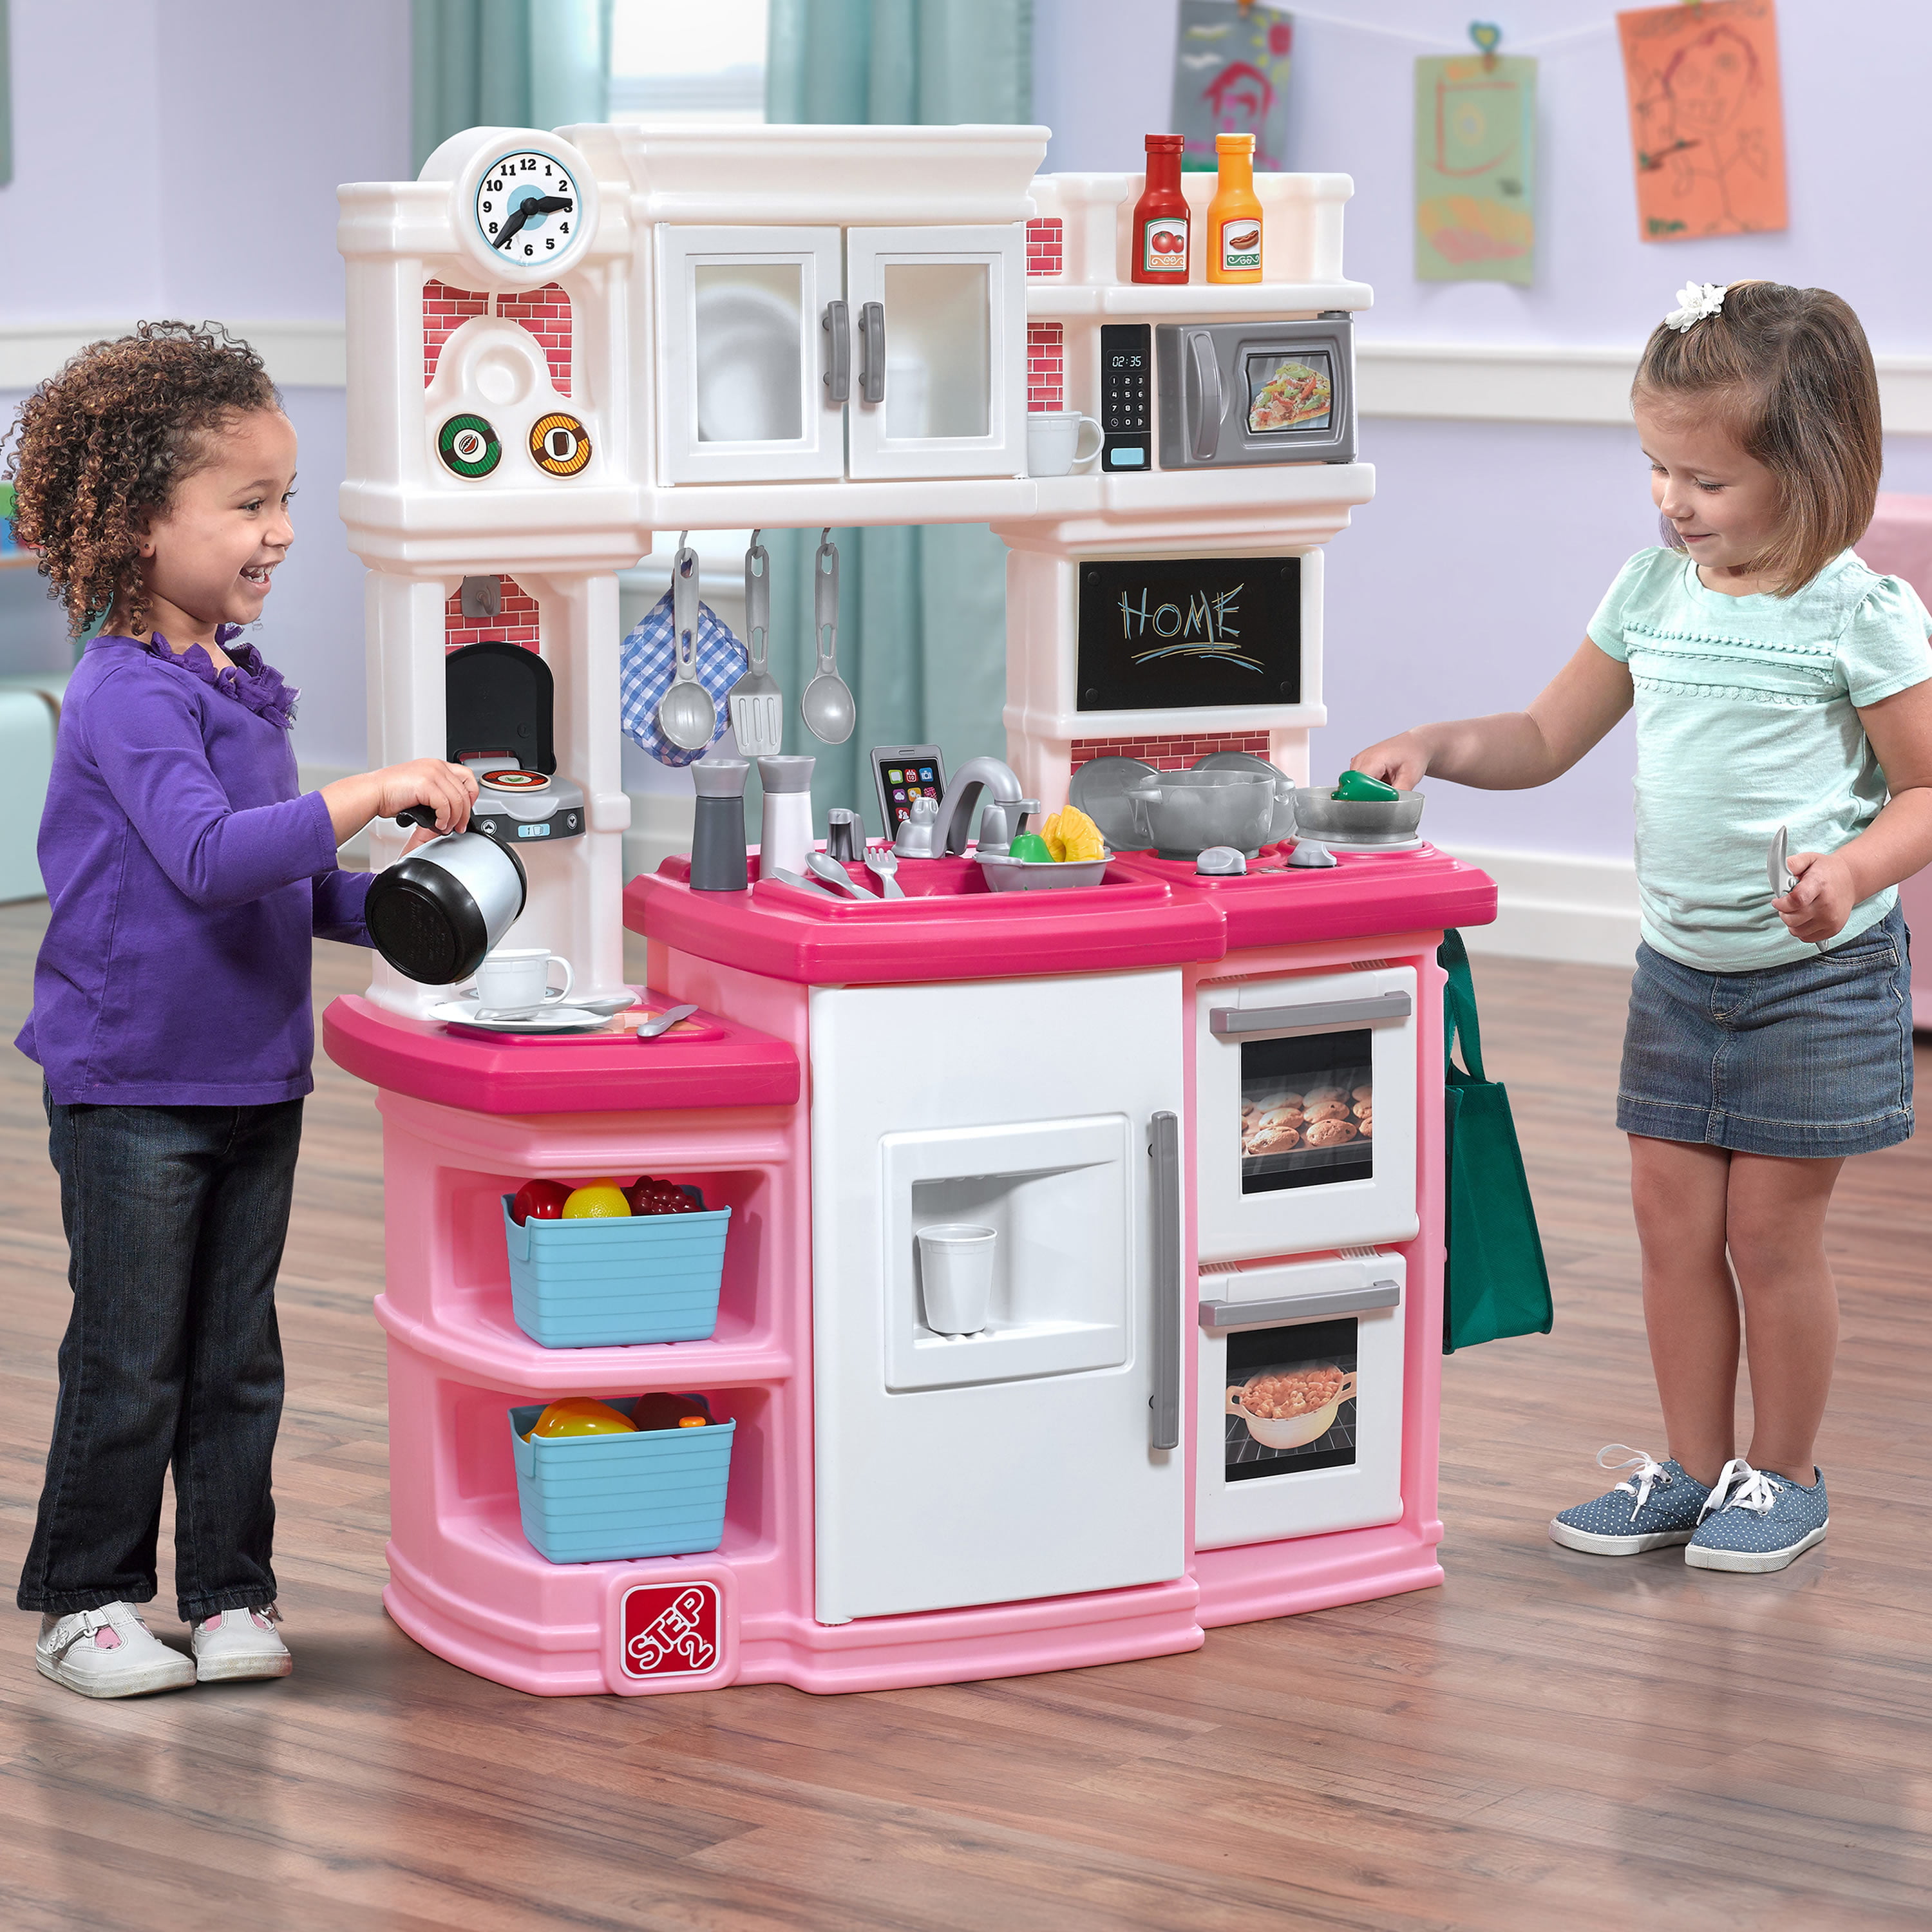 Step2 Great Gourmet Kitchen Set Pink Play Pretend Cooking Kids Play Toy Fun Gift 733538868094 | eBay